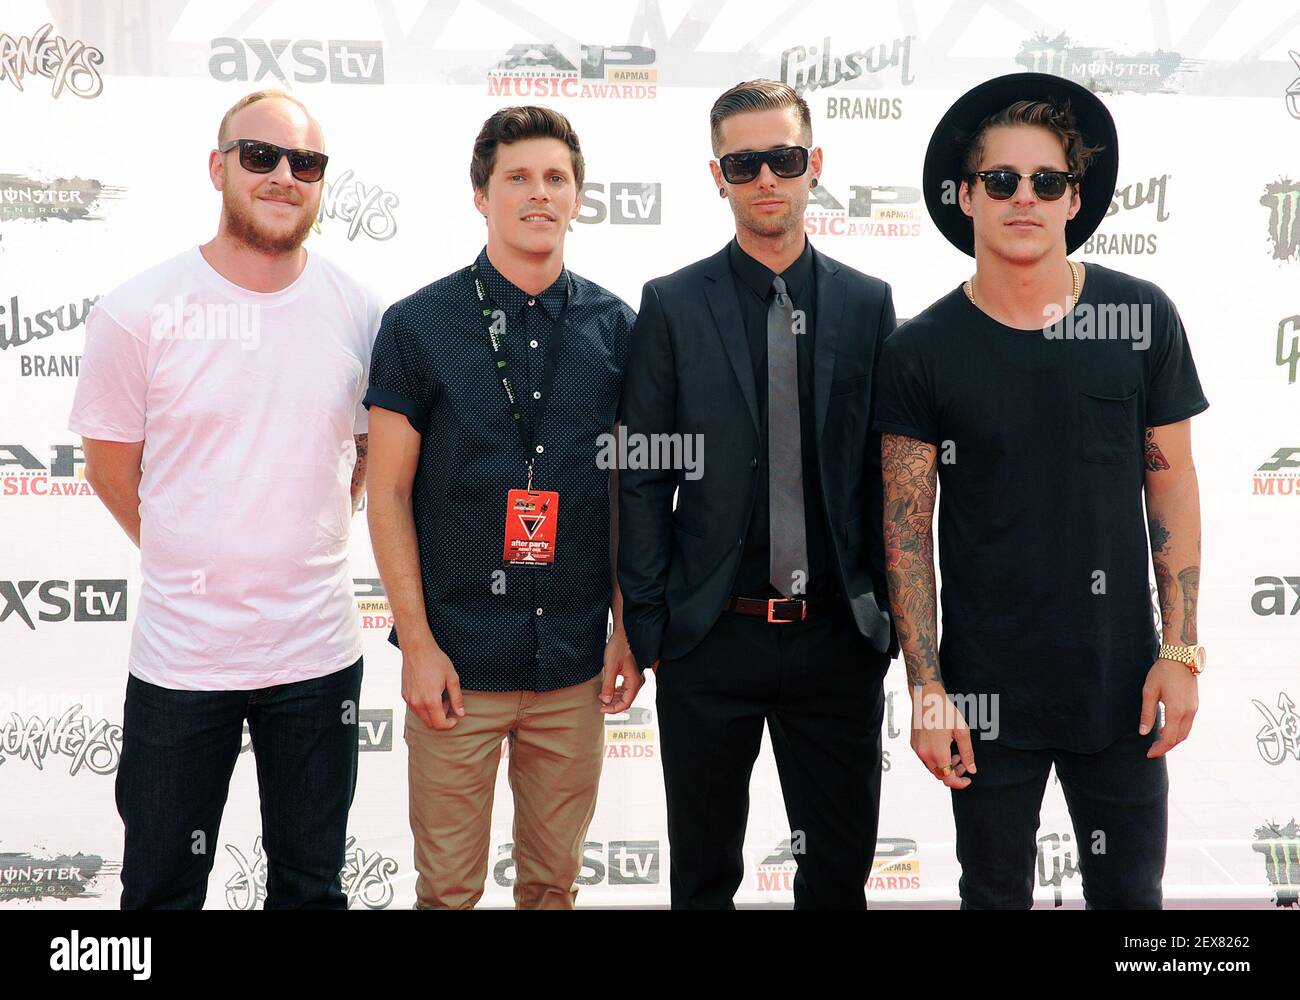 22 July 2015 - Cleveland, Ohio - Trevor Wentworth, Matt Wentworth, Alex  "Woody" Woodrow, Tim Molloy of the band Our Last Night attend the 2015  Alternative Press Music Awards at Quicken Loans